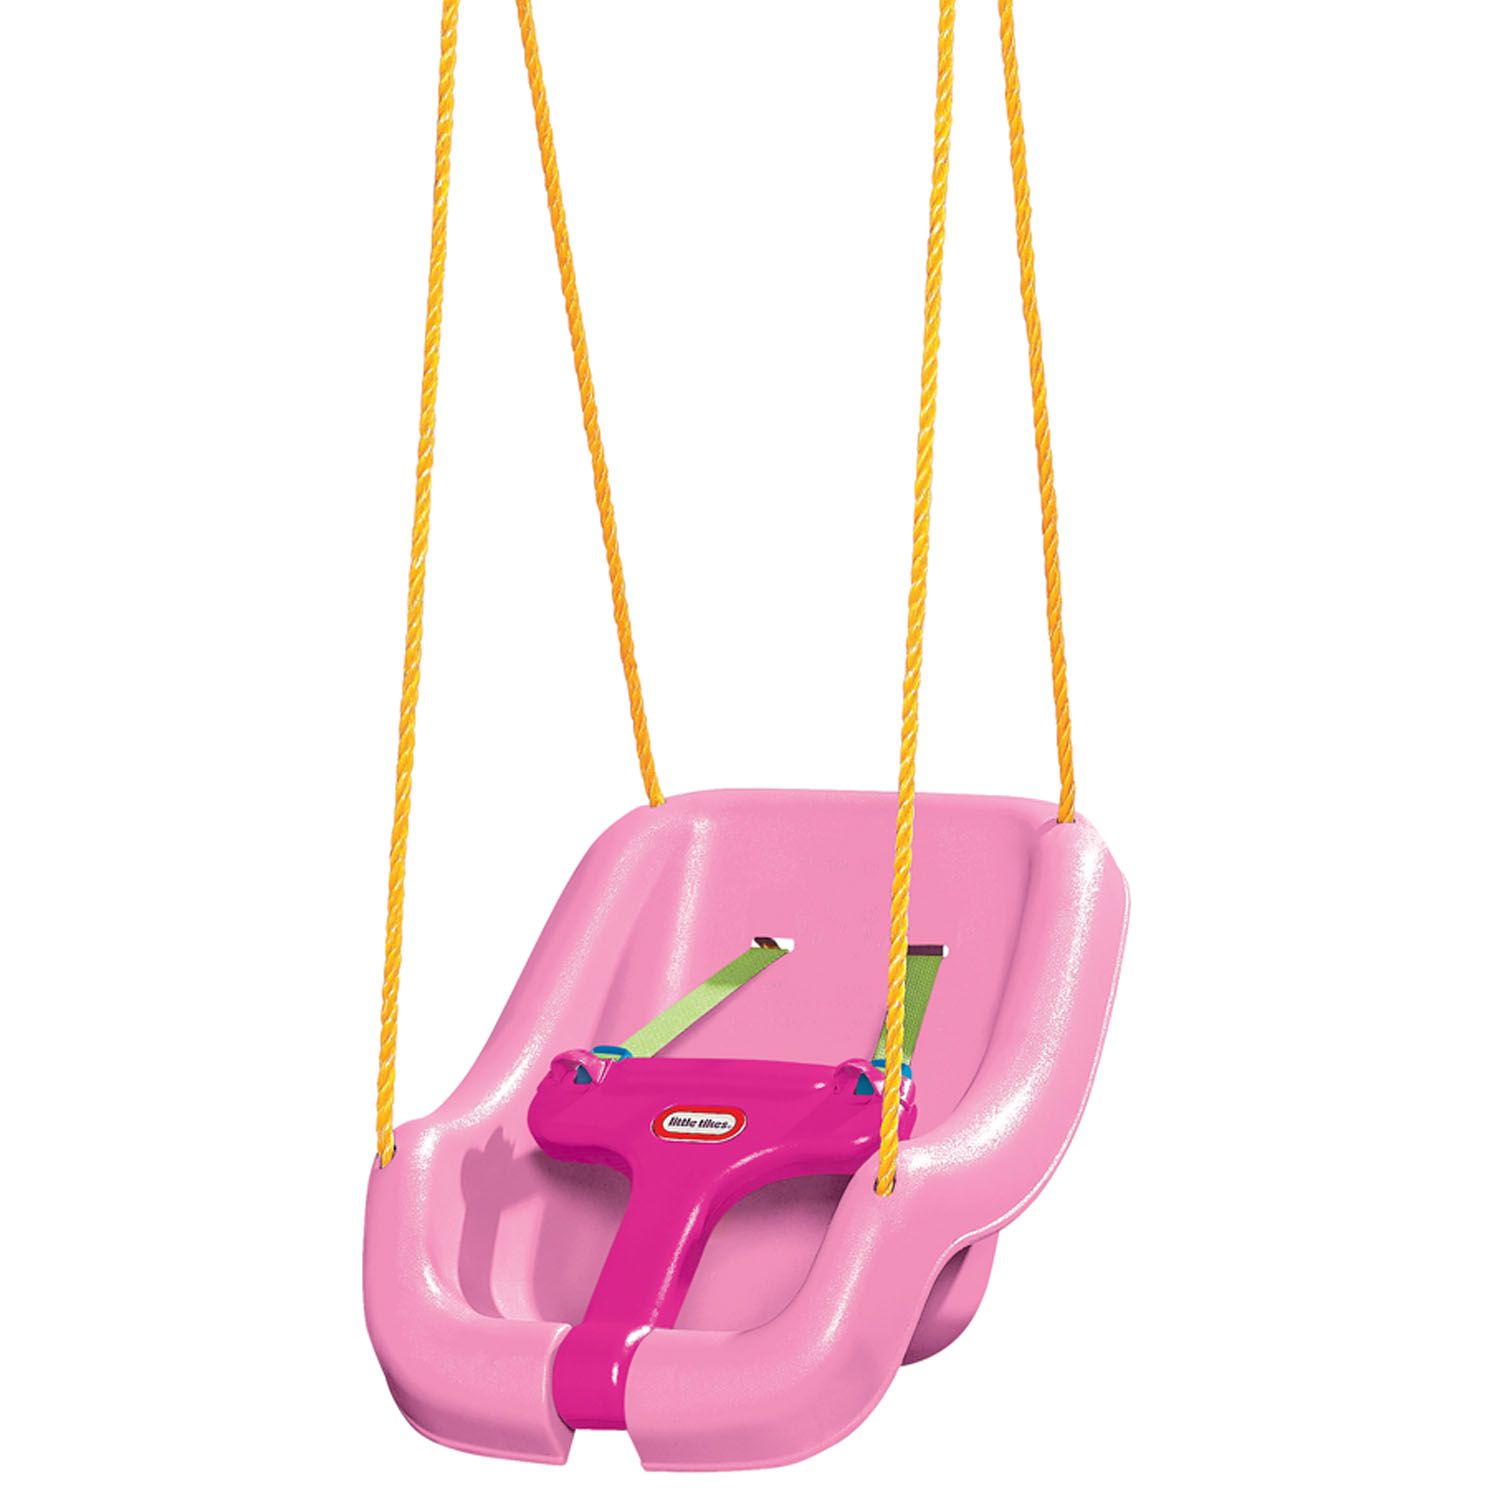 Little Tikes Is Recalling Half a Million Swings After 2 Toddlers Broke Their Arms